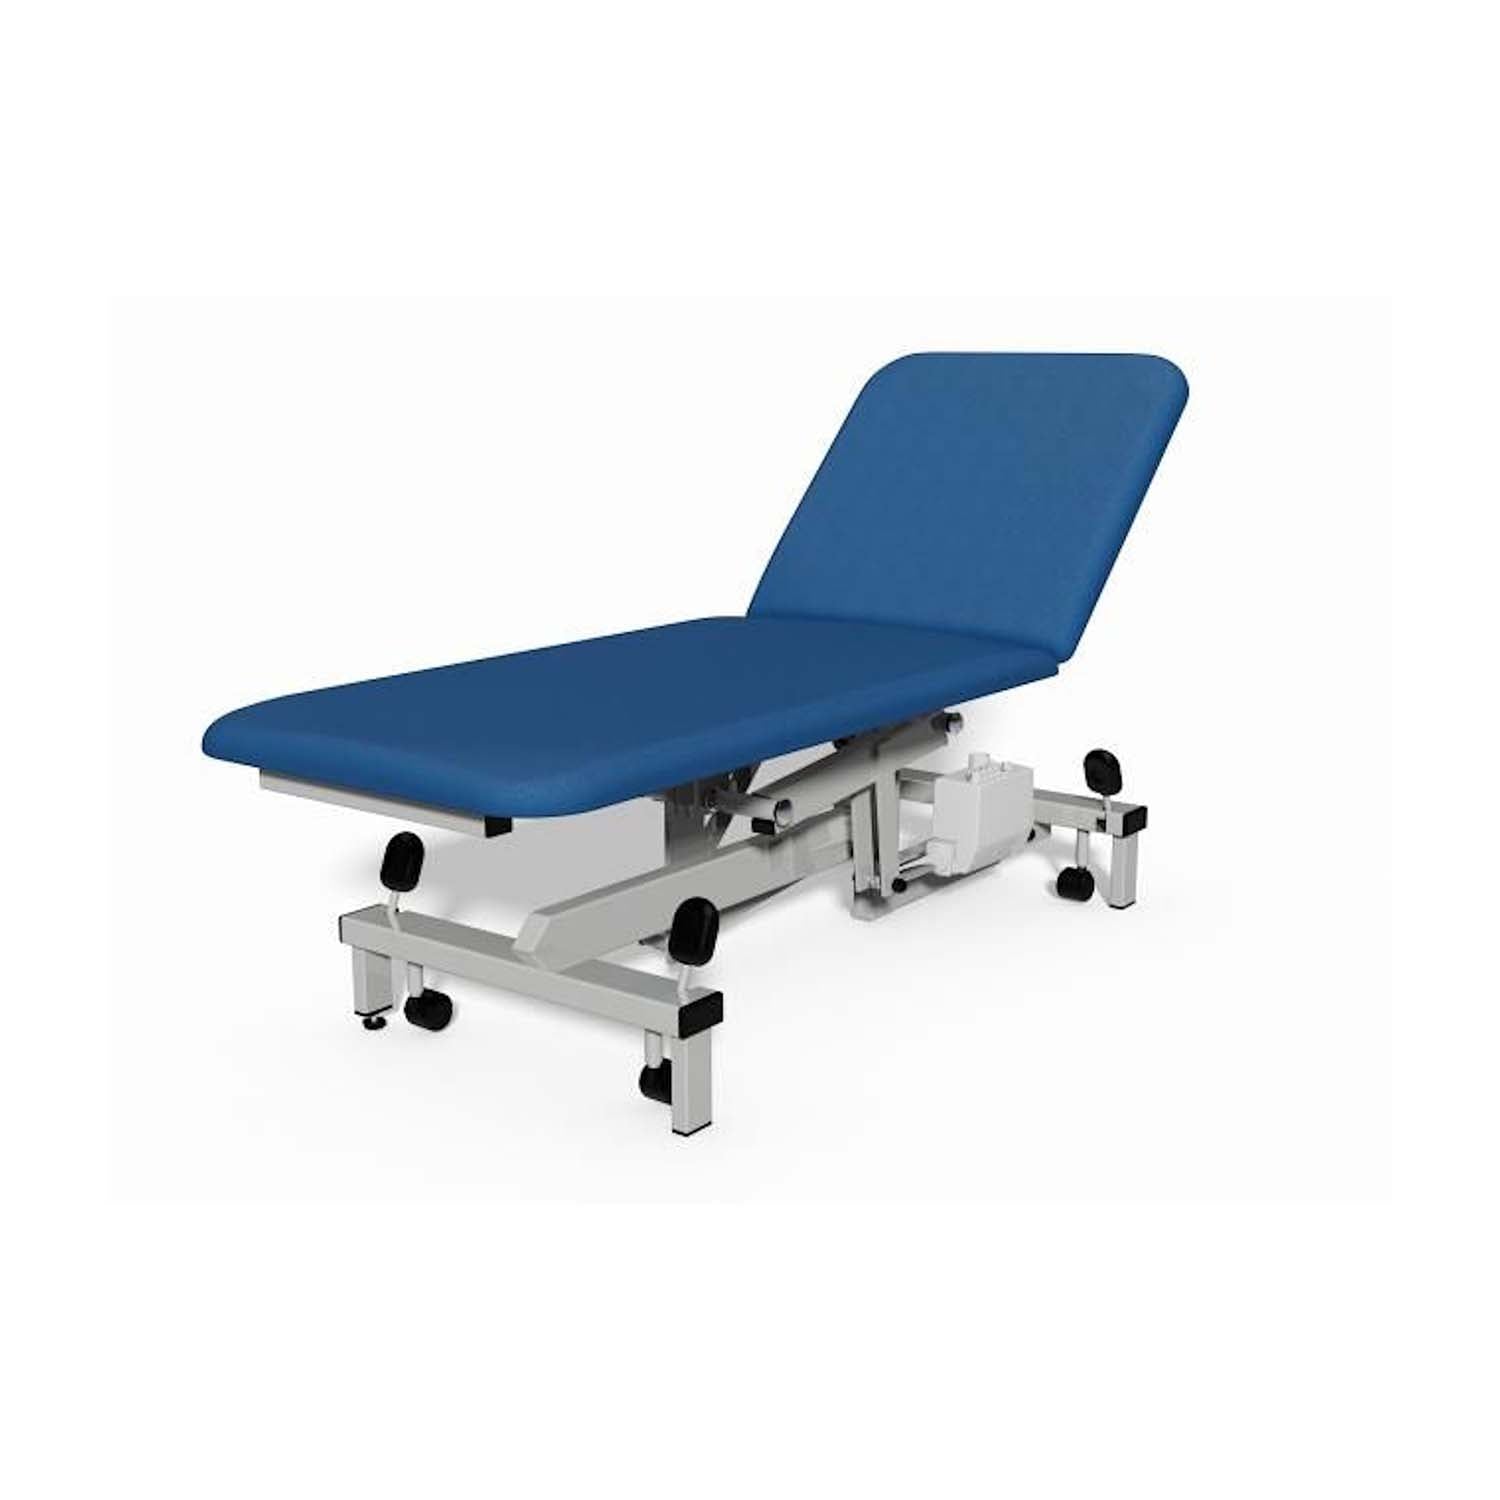 Plinth 2000 Model 502 Examination Couch | Electric | Lupin